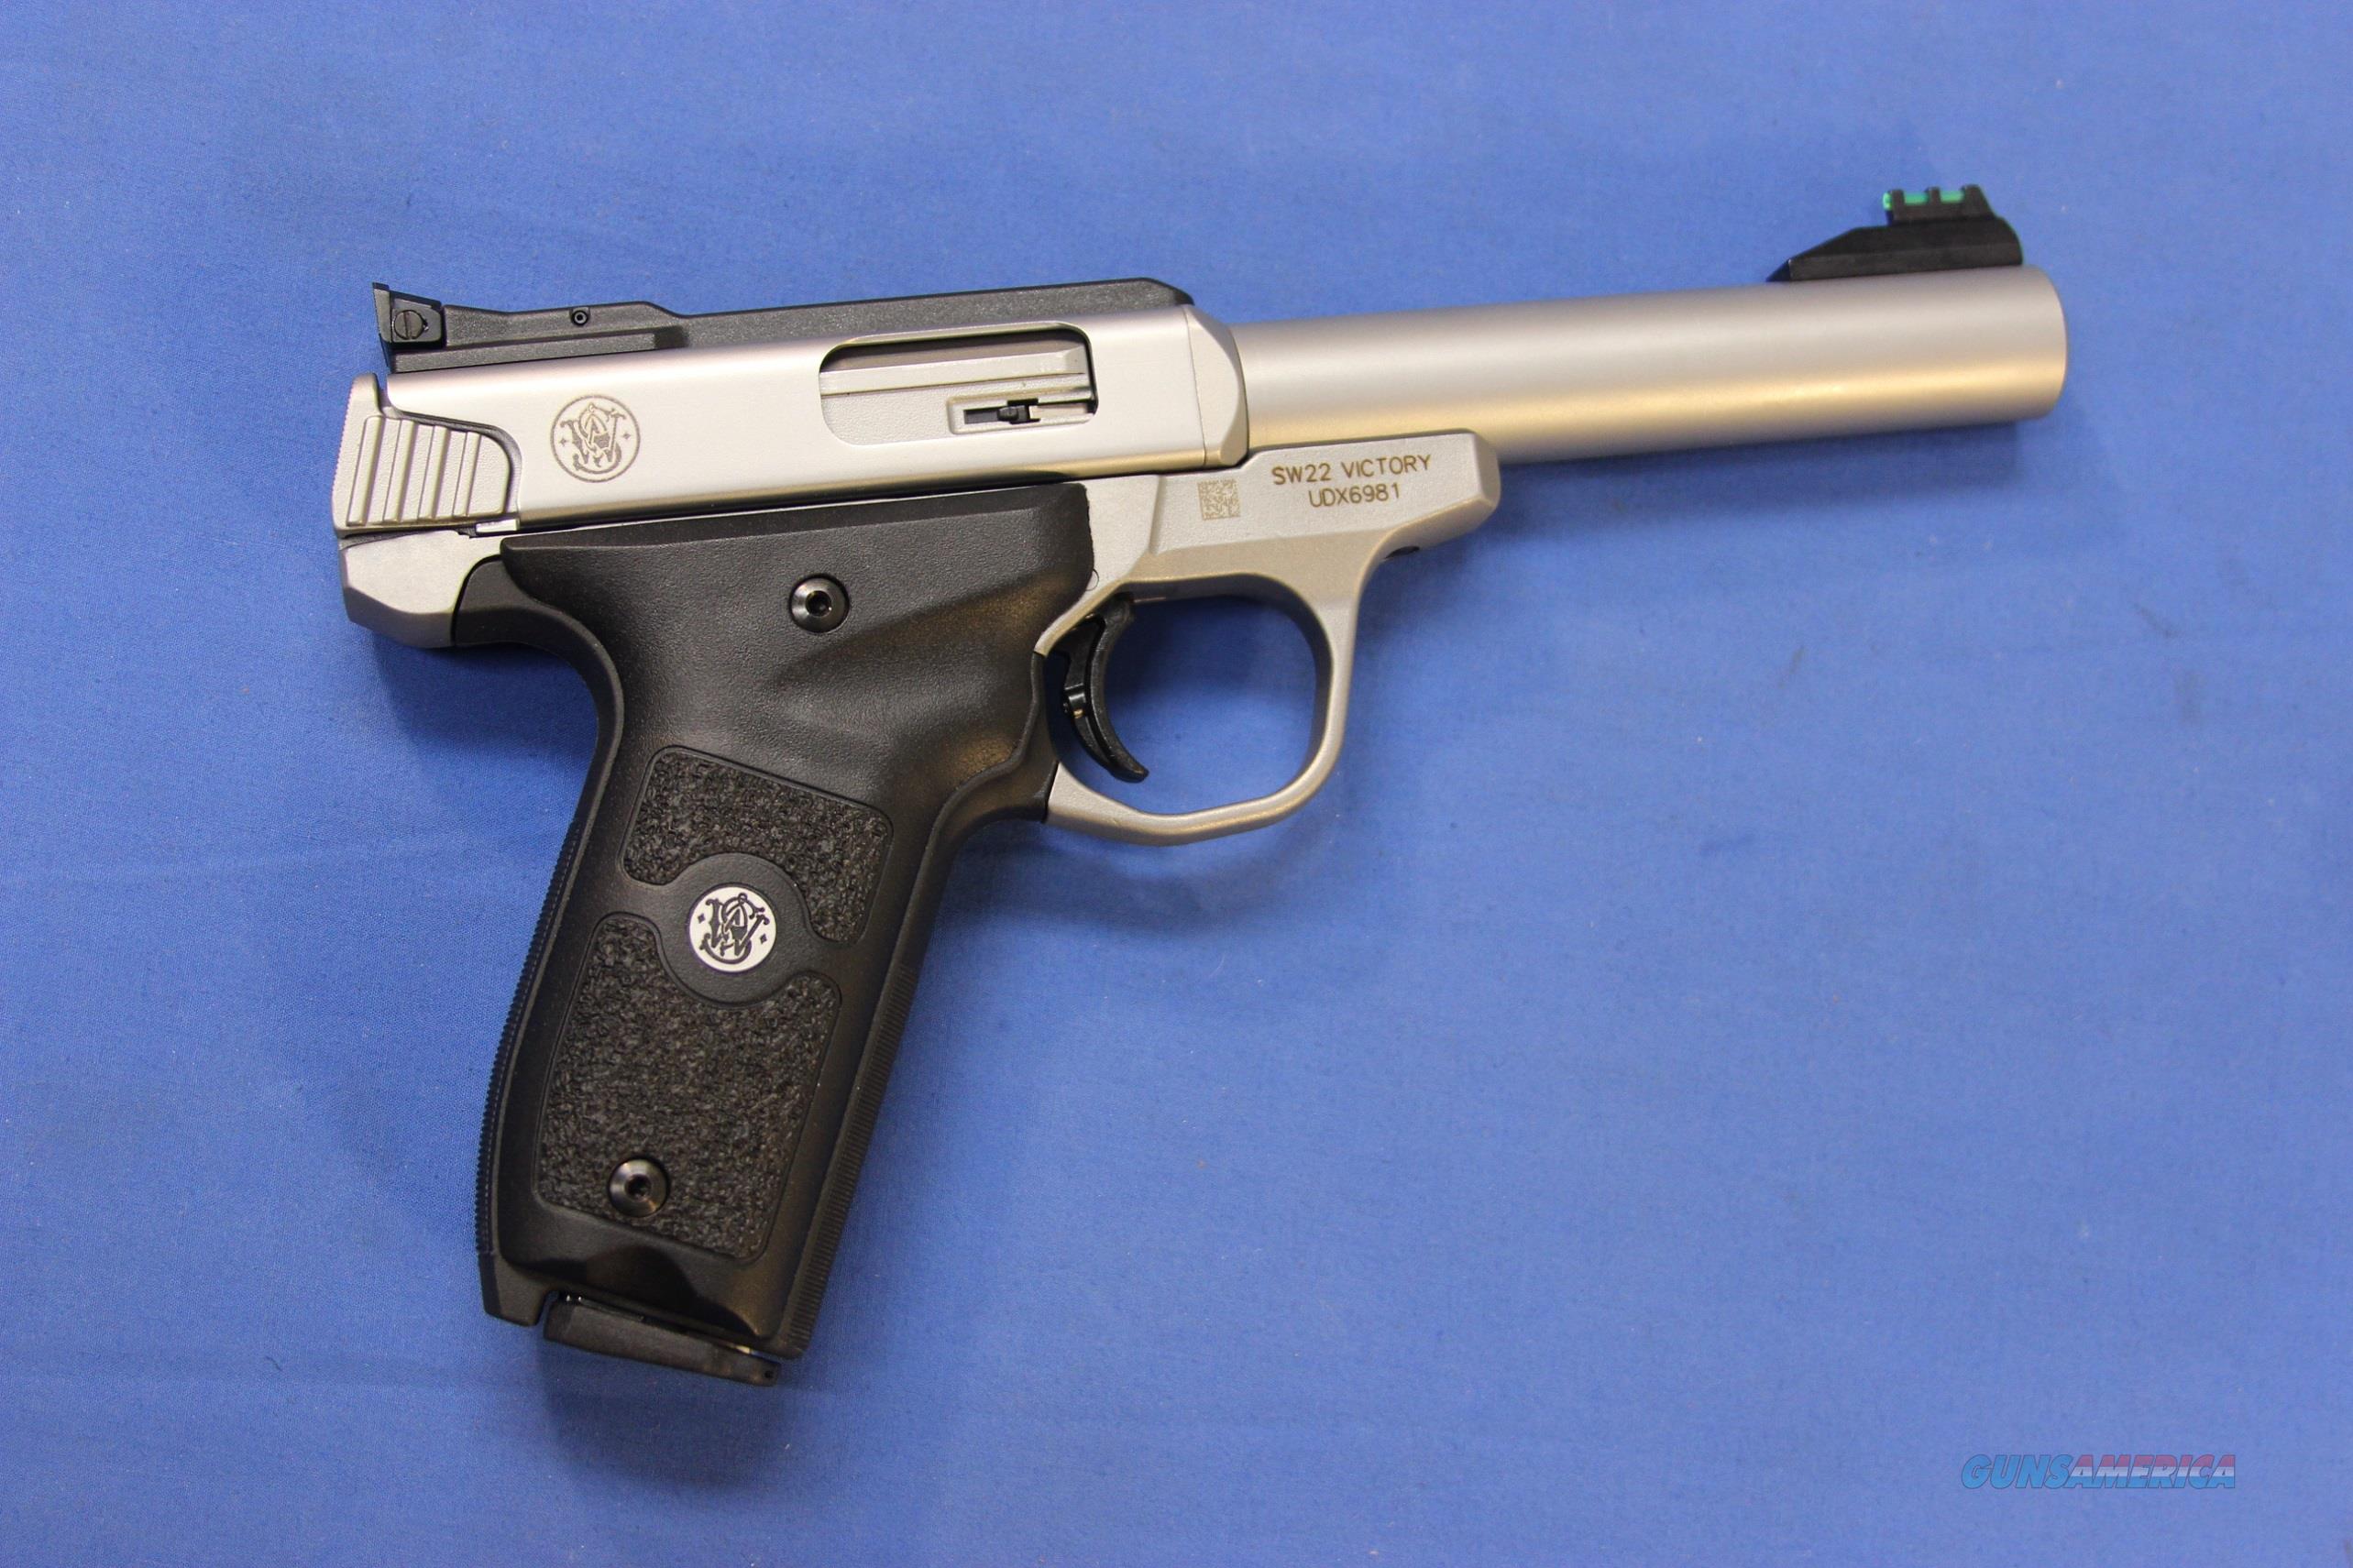 Armslist - For Sale: Smith And Wesson Victory 22 Threaded Ba